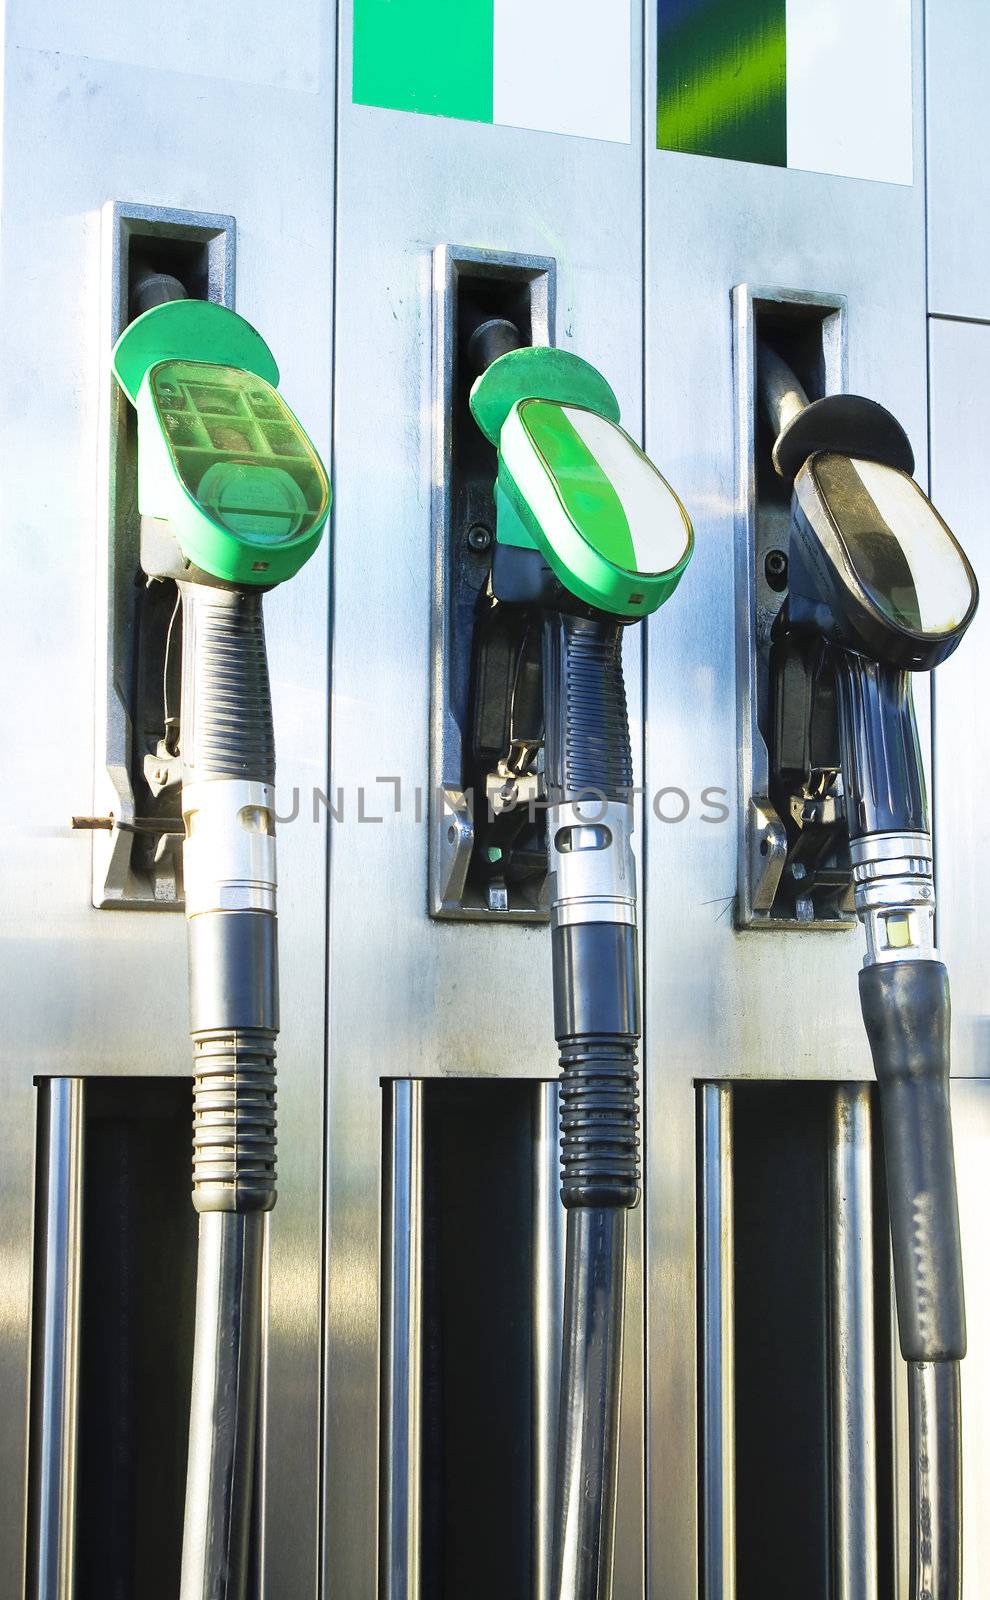 Fuel, oil station  by photo4dreams